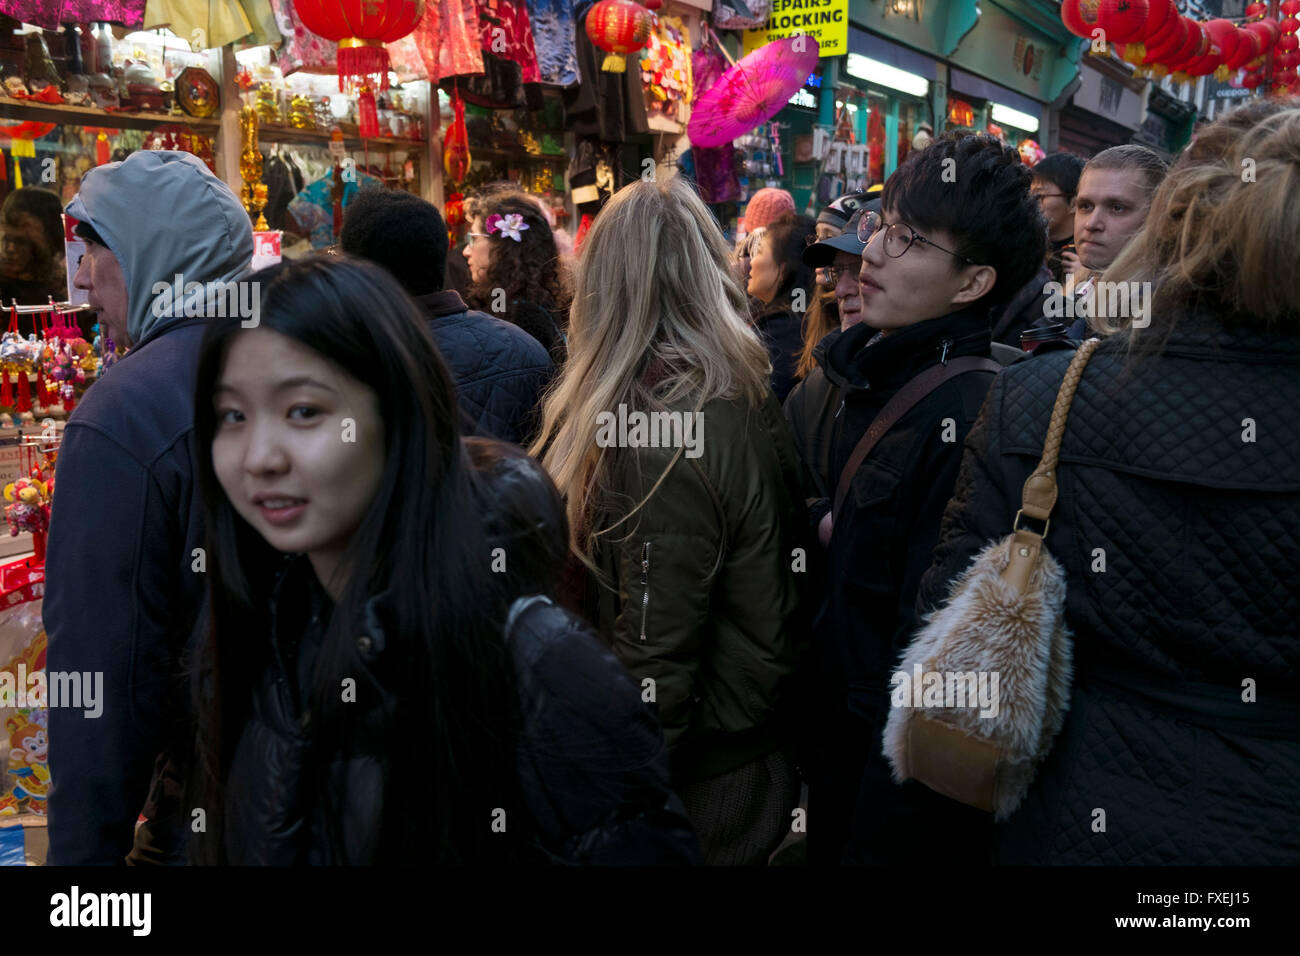 Crowds of people squeeze into a narrow street Chinatown during Chinese New Year celebrations in central London, United Kingdom. Tens of thousands of people gathered in the West End filling the streets and joining in with the festival atmosphere. Stock Photo